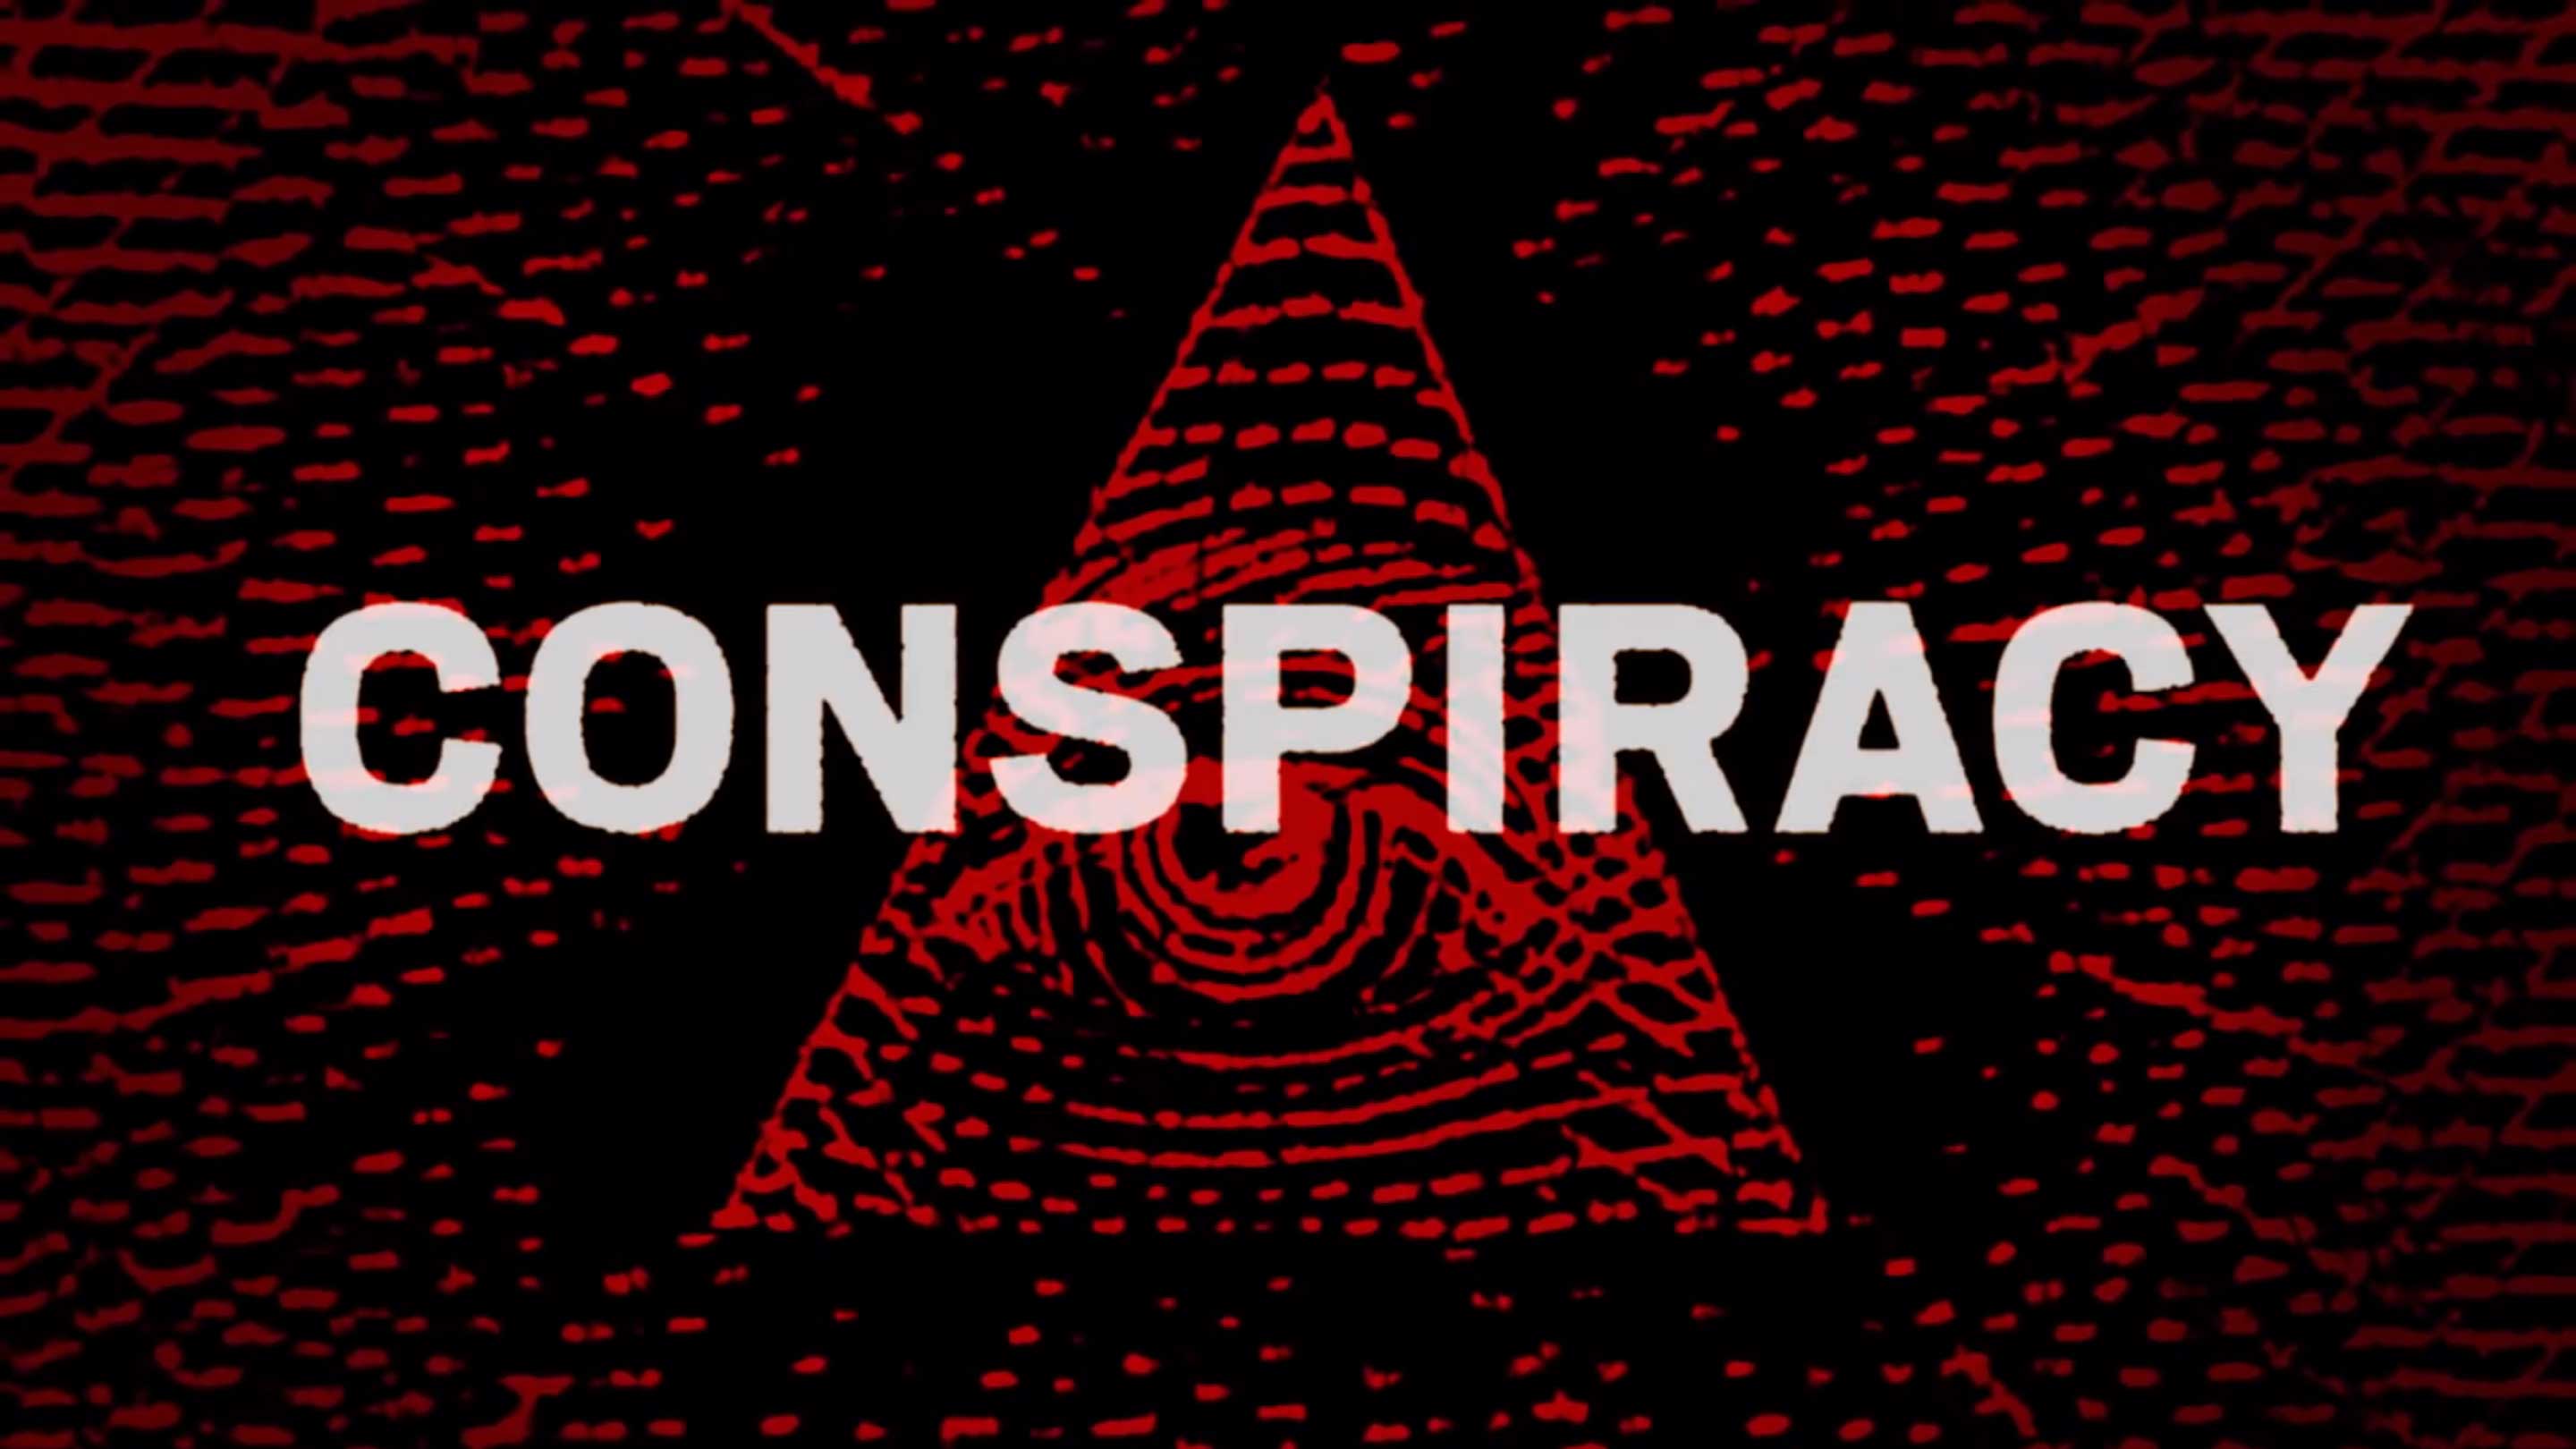 HQ Conspiracy Theory Wallpapers | File 181.44Kb